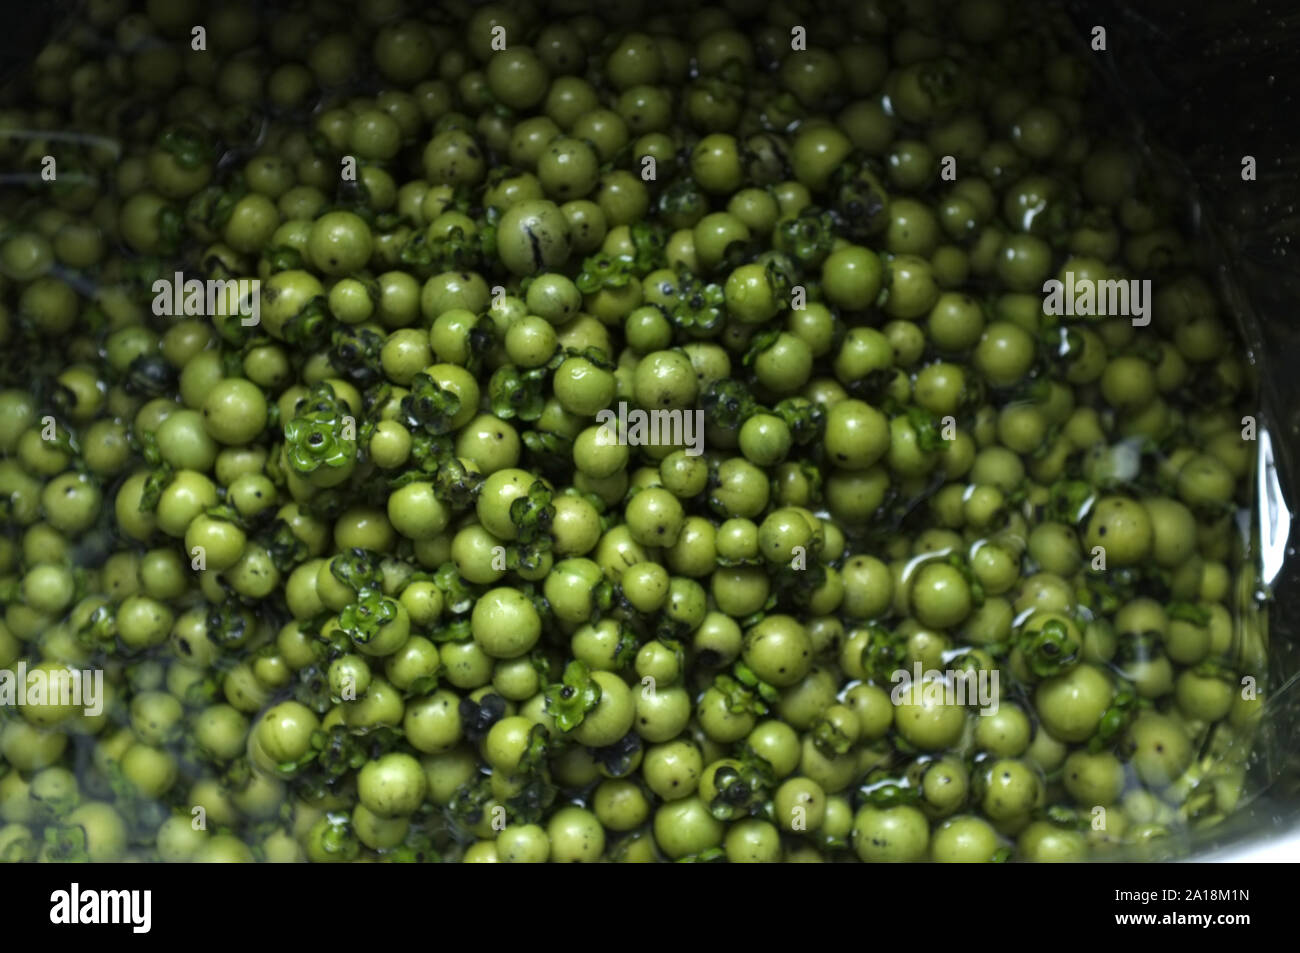 Fresh Diospyros mollis fruits Background , Thai herb and Natural dyes for fabric Stock Photo